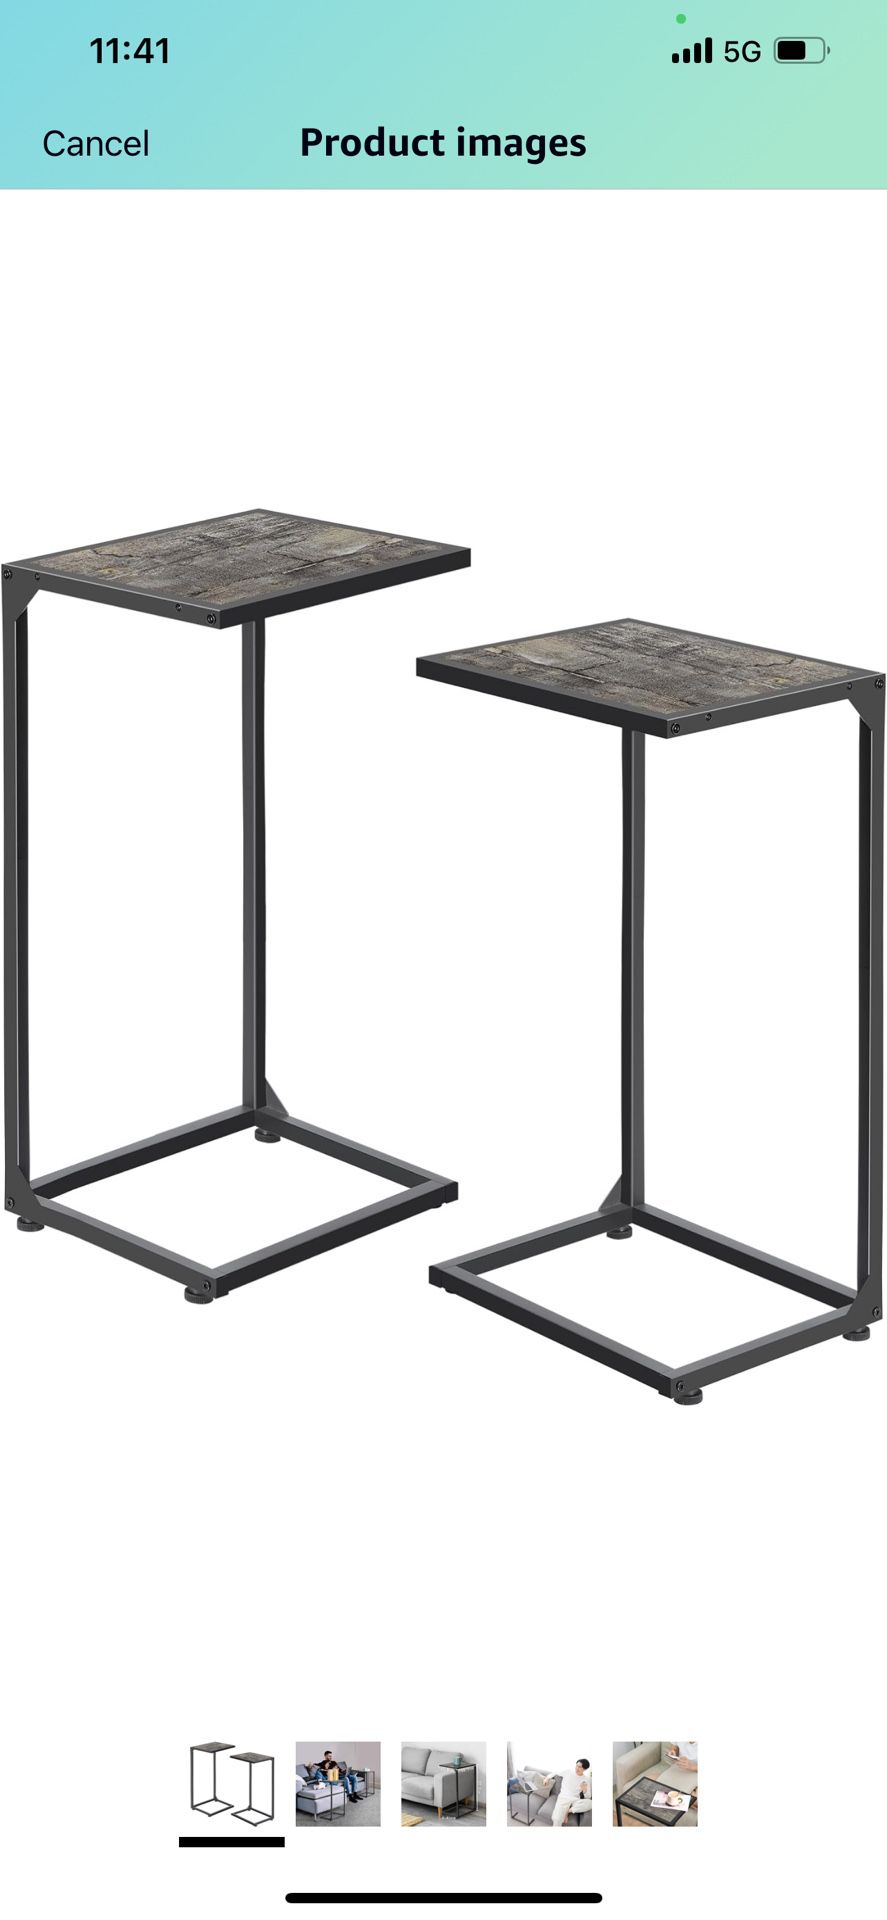 4.5 4.5 out of 5 stars 222 C Shaped End Table Set of 2, C Tables for Couch, Snack Side Table for Sofa, Couch Tables That Slide Under, Small TV Tray Ta